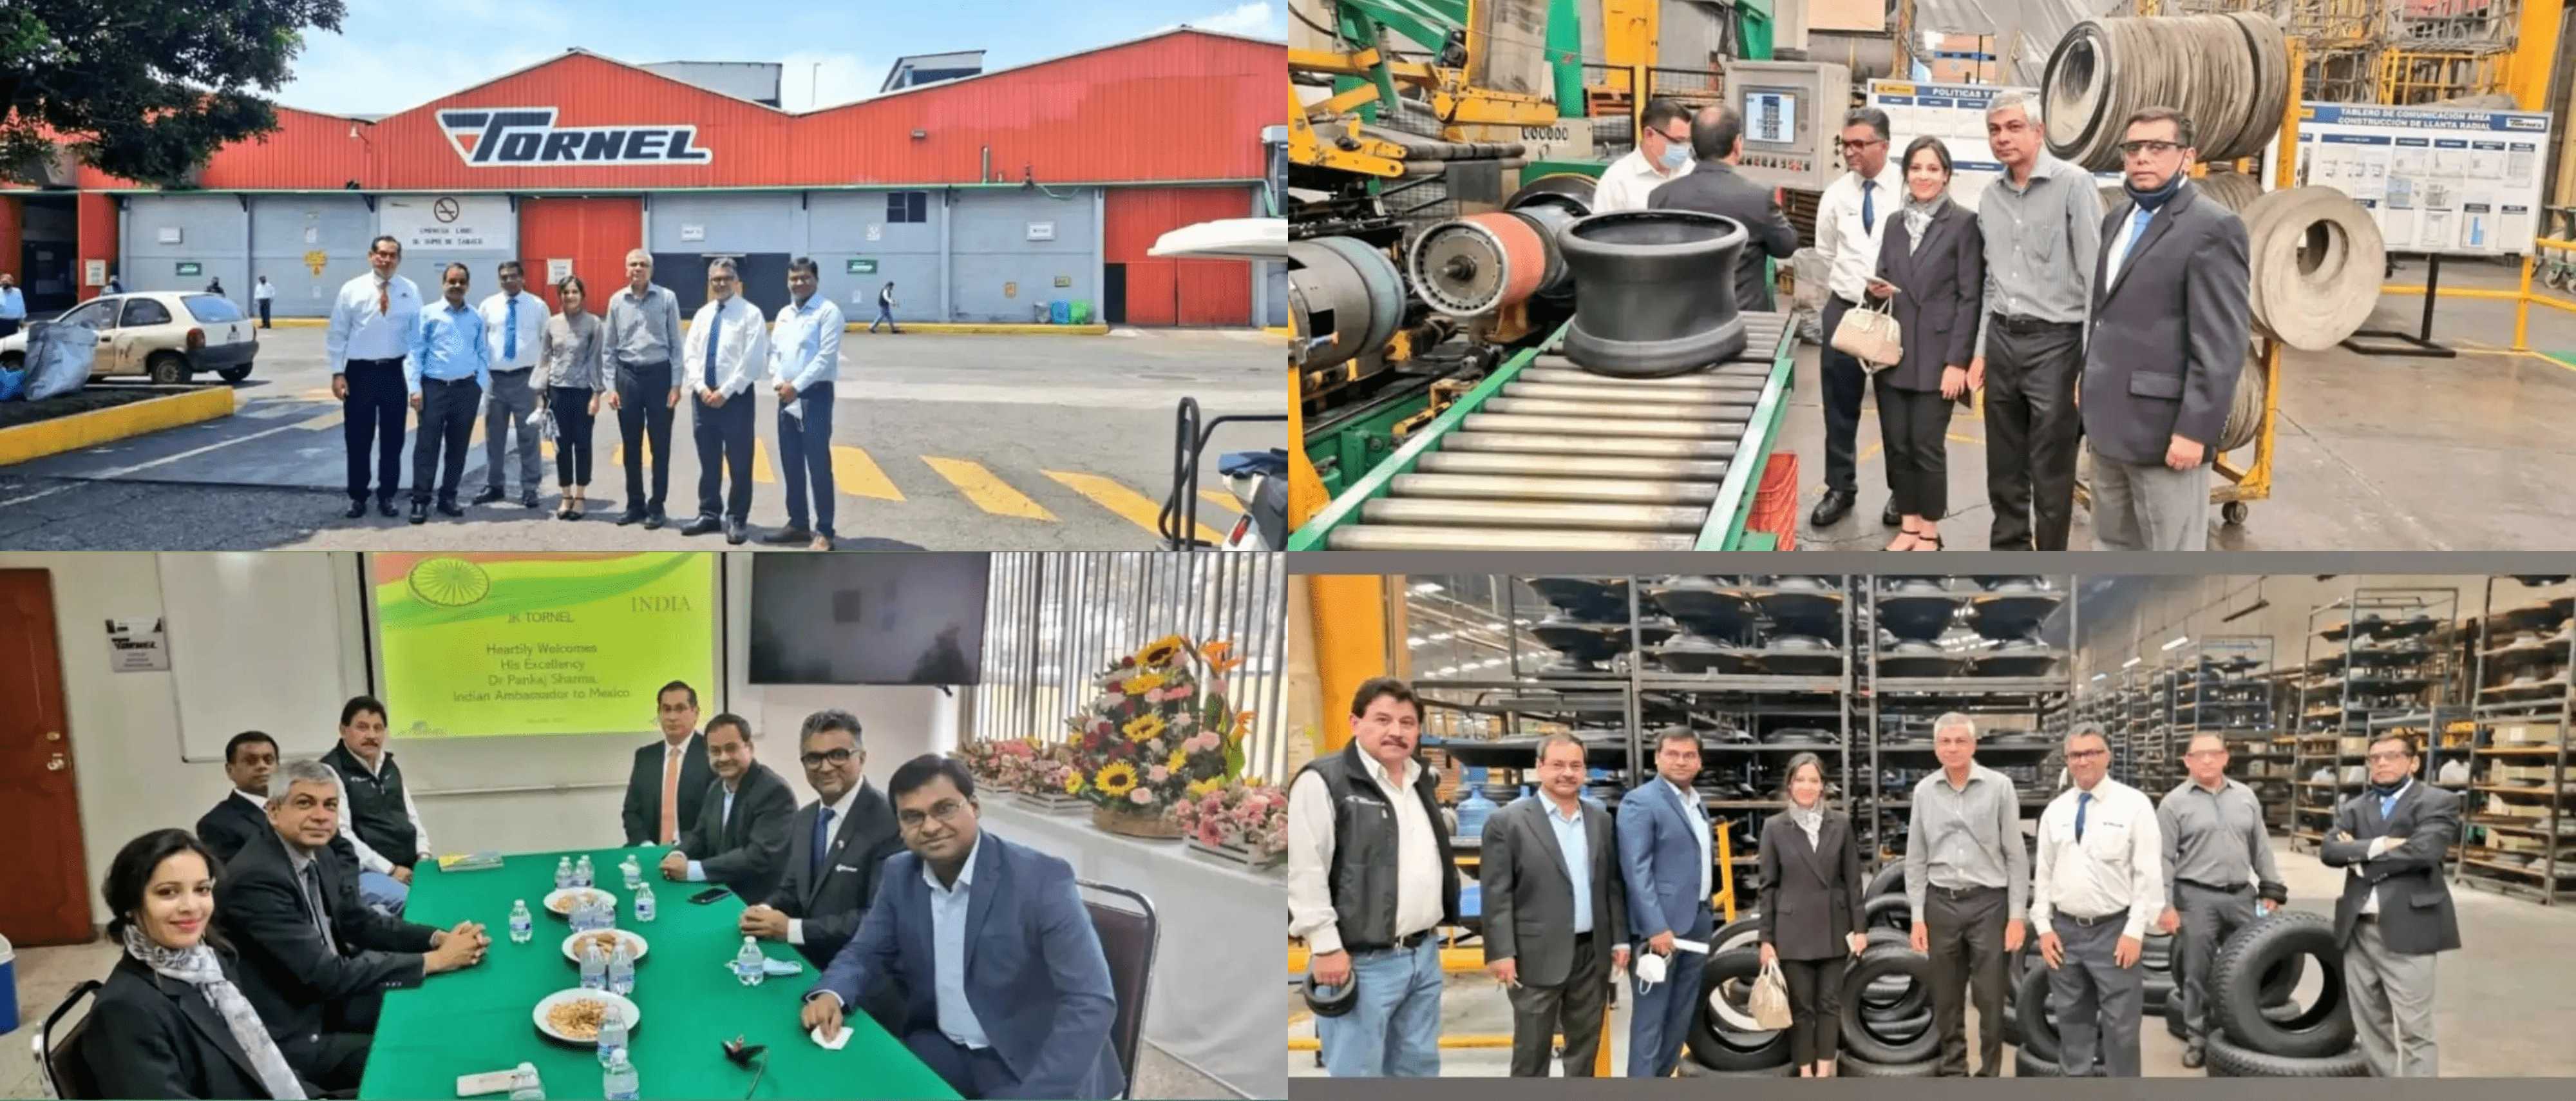  <div style="fcolor: #fff; font-weight: 600; font-size: 1.5em;">
<p style="font-size: 13.8px;">JK Tyres Tornel: Made in India and manufactured in México!

Ambassador Pankaj Sharma and Embassy officers had a productive & educative visit to the plant that brings the best of India & Mexico .

Running successfully since 2008 & exporting to all of Americas, credits to CEO Pravin Chaudhari & his great team. May they keep rolling!

<br /><span style="text-align: center;"> 25 May 2022</span></p>
</div>

